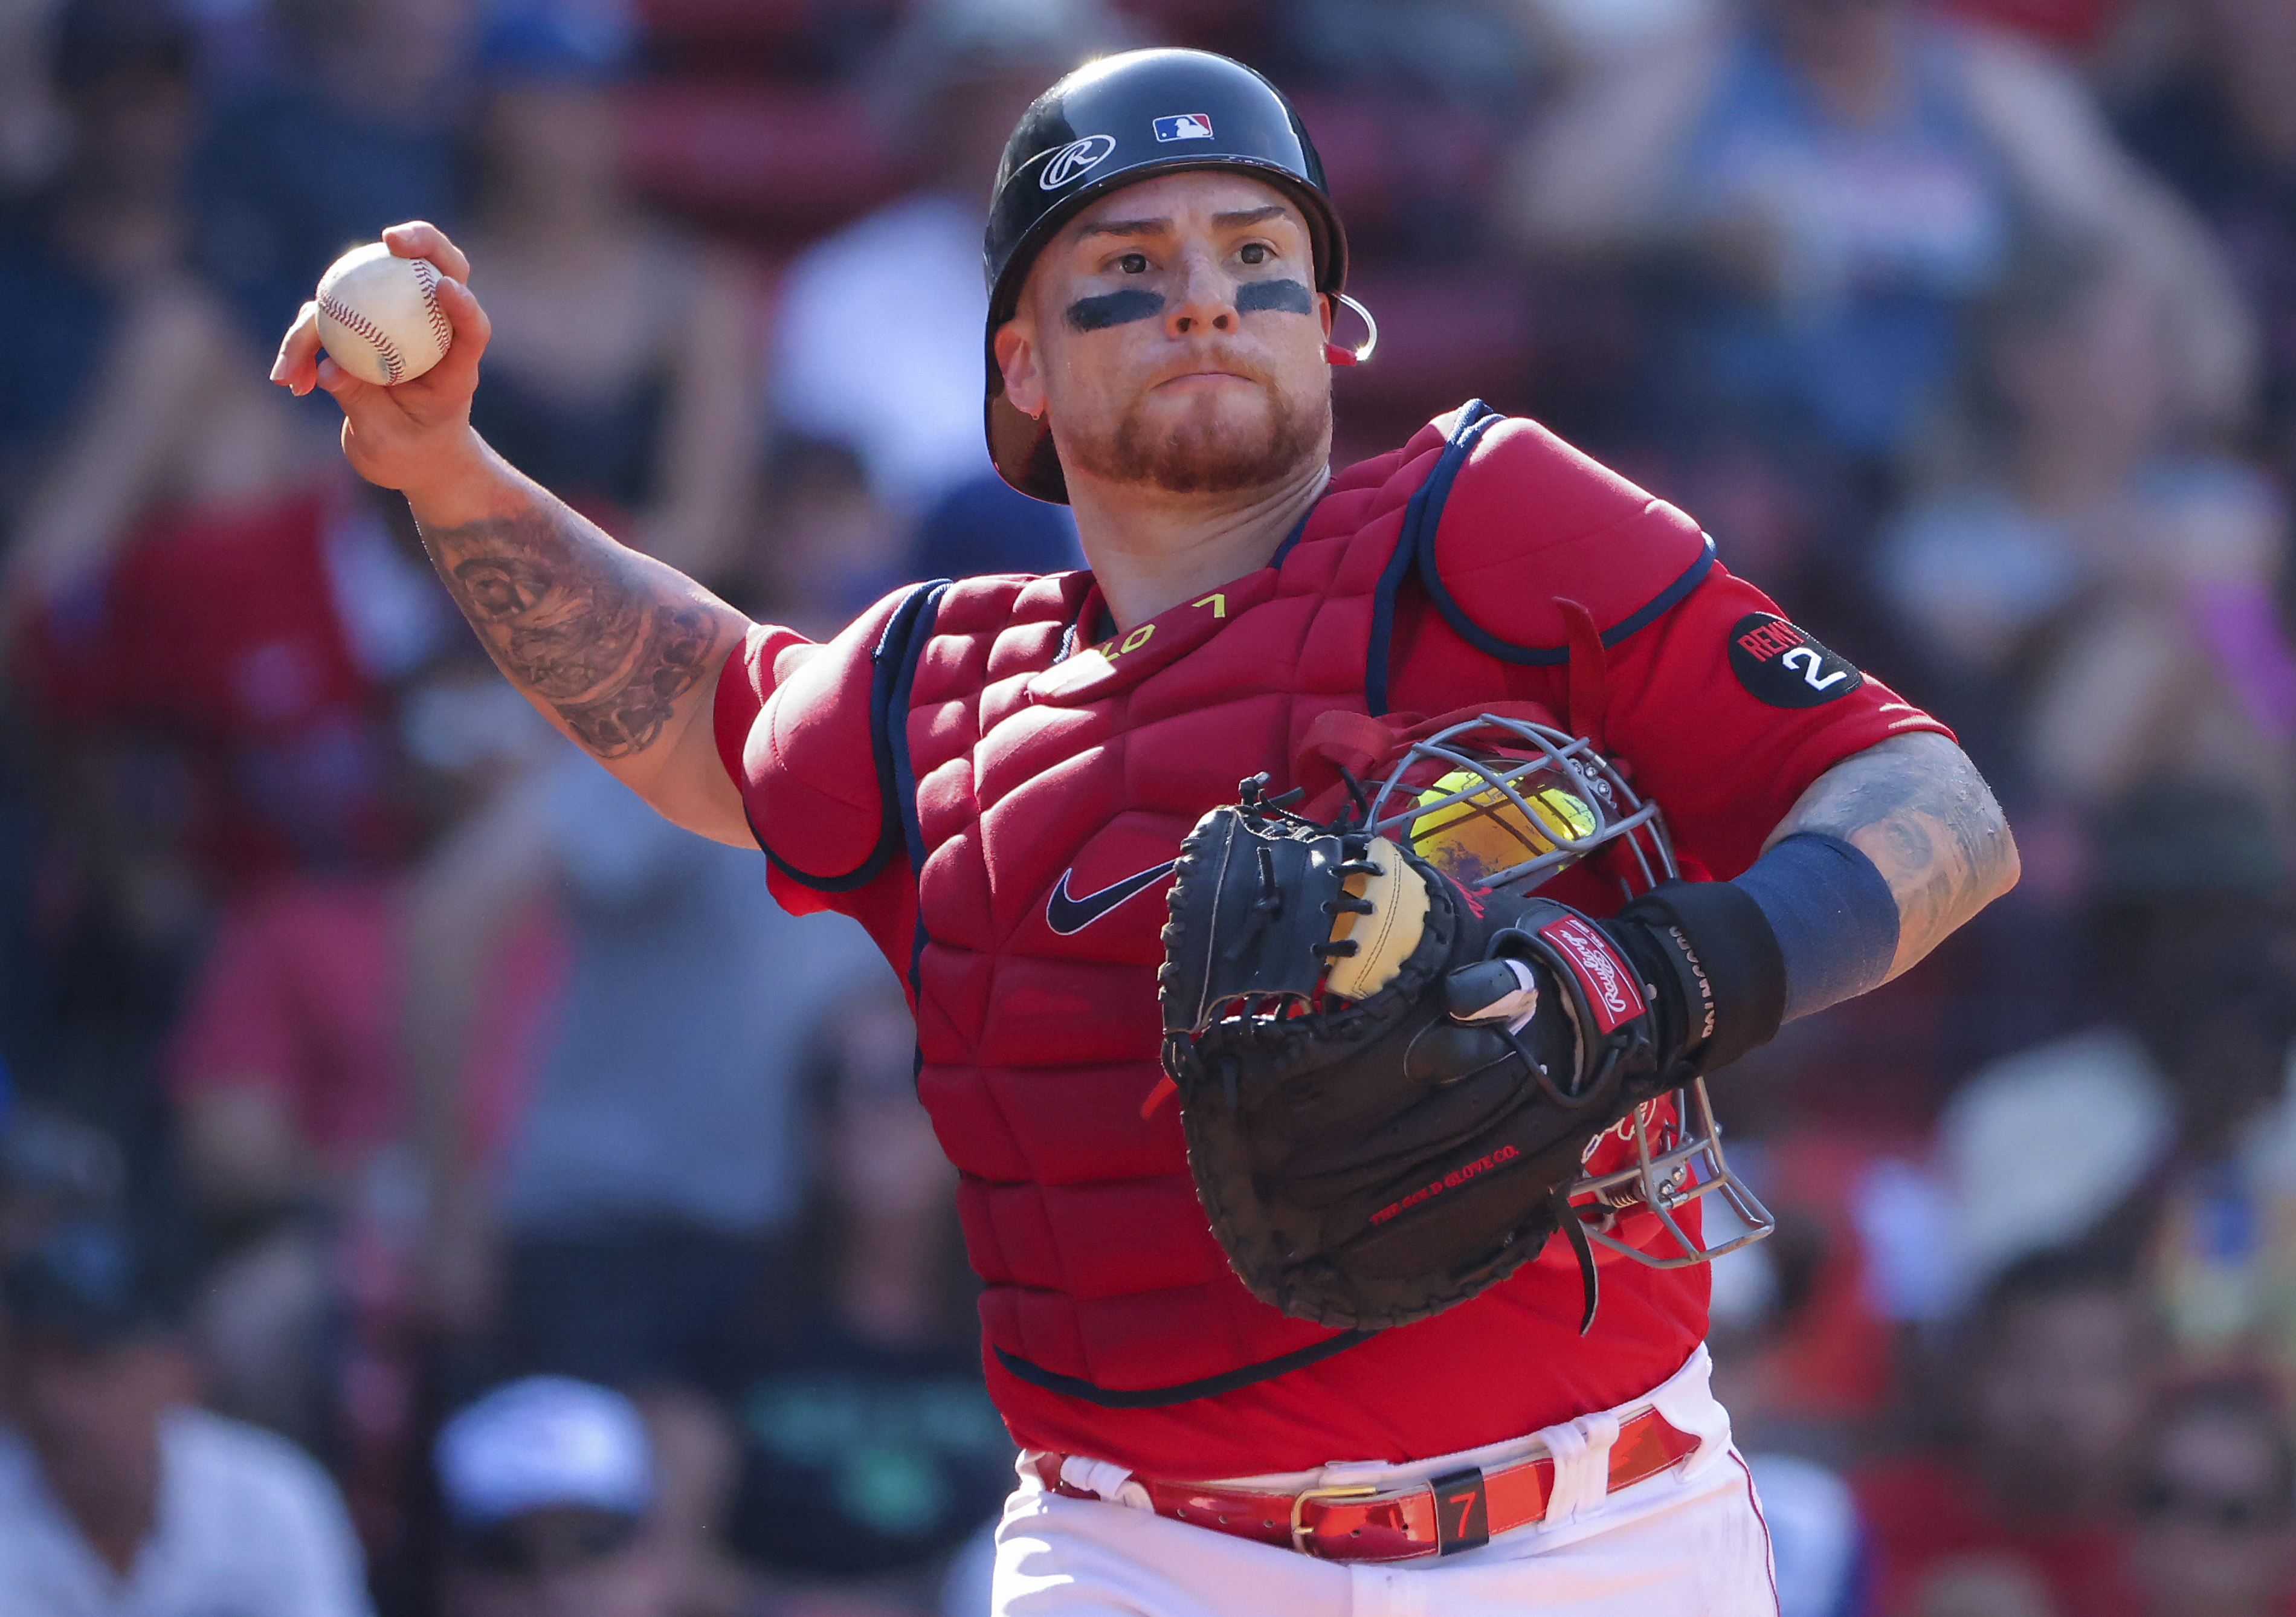 Christian Vazquez reportedly signs three-year deal with Twins - CBS Boston